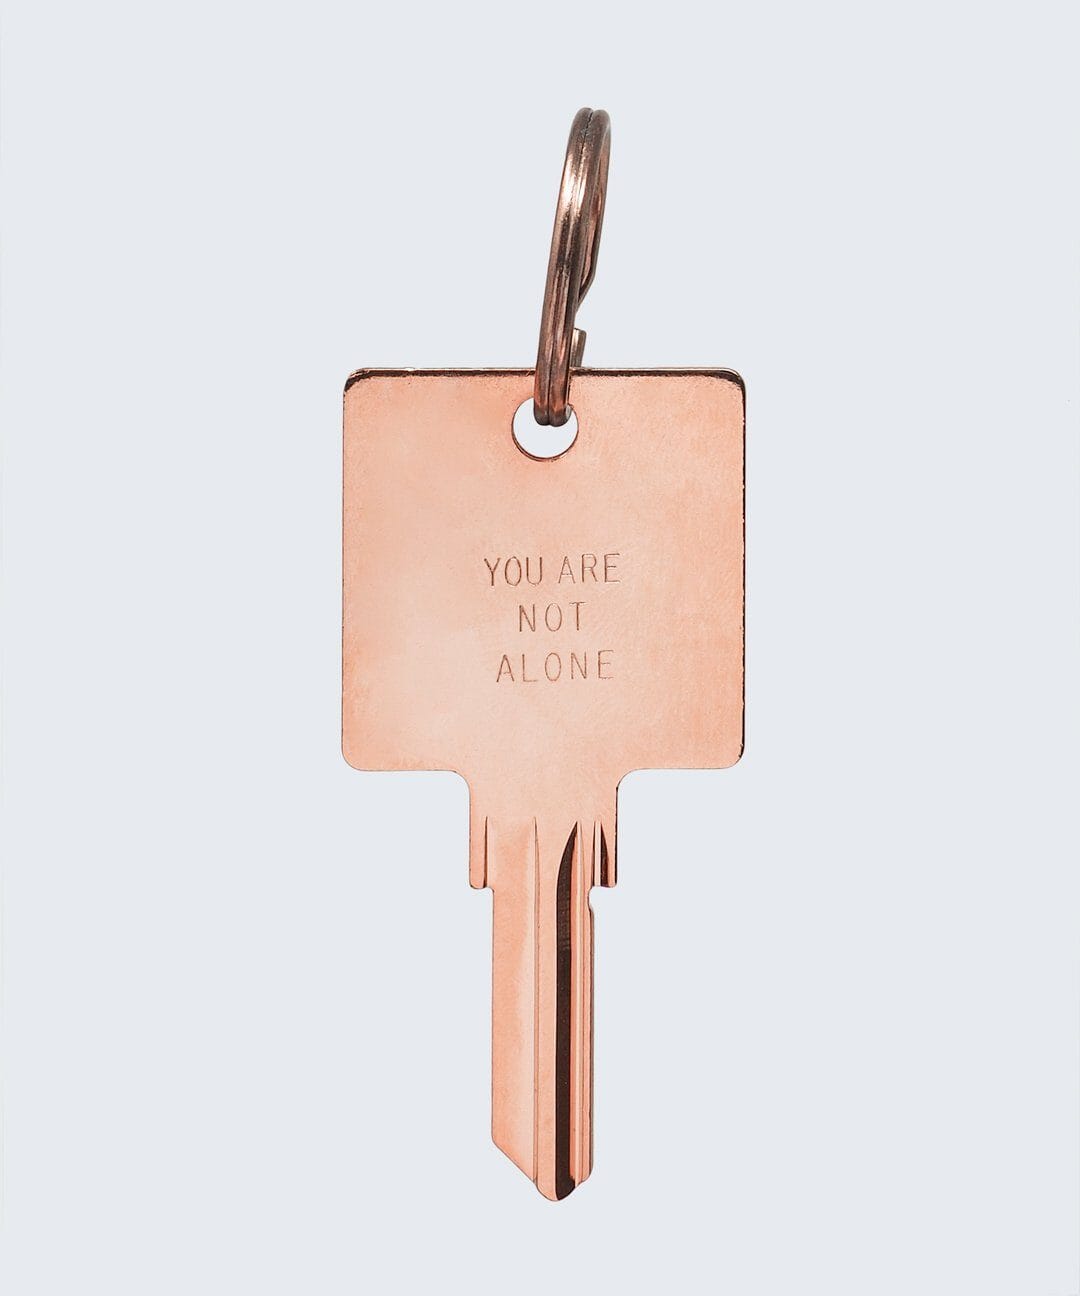 N - YOU ARE NOT ALONE Keychain Key Chain The Giving Keys 